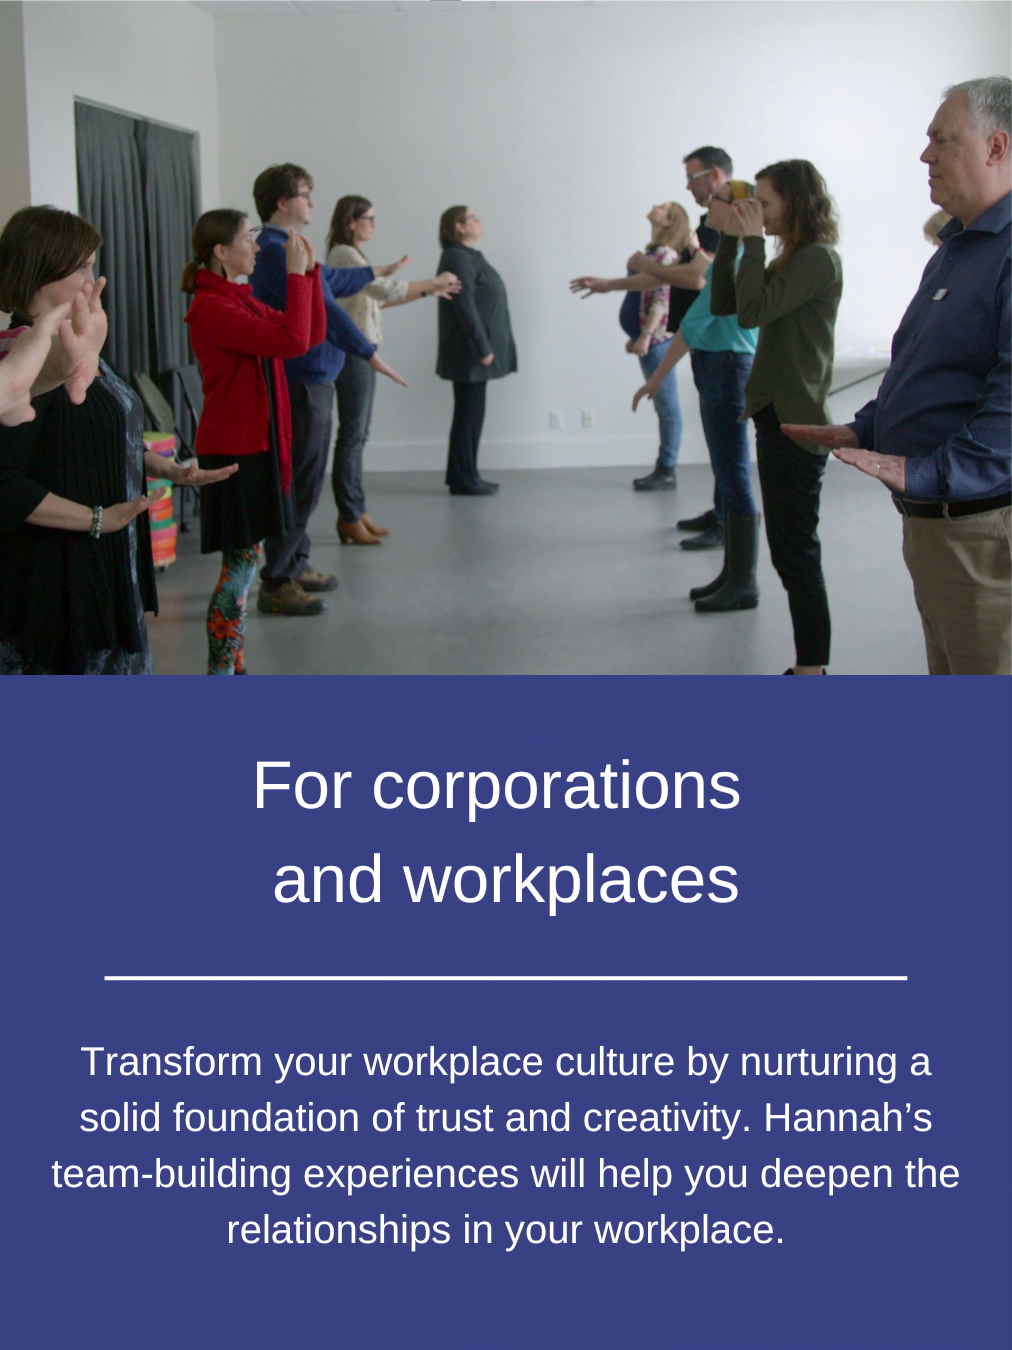 Hannah Beach's services for Corporations and workplaces